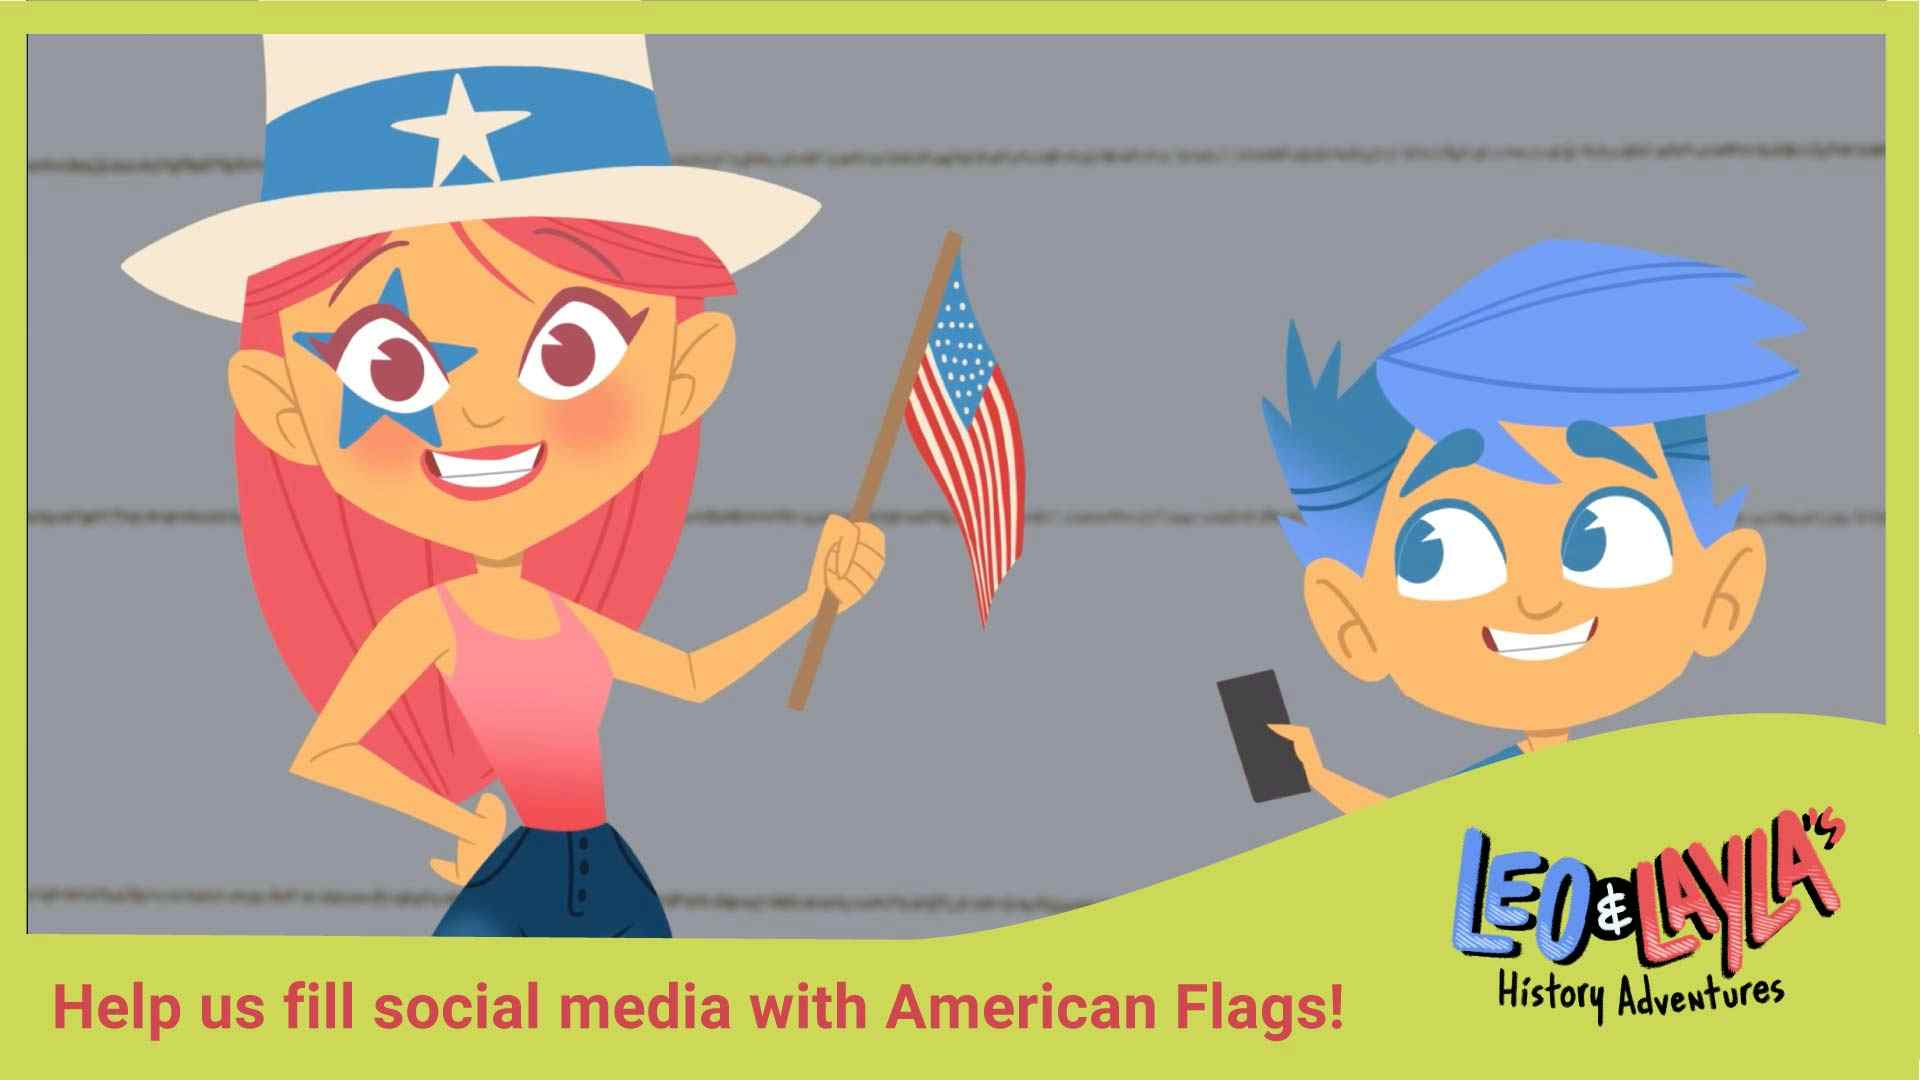 Help us fill social media with American Flags!